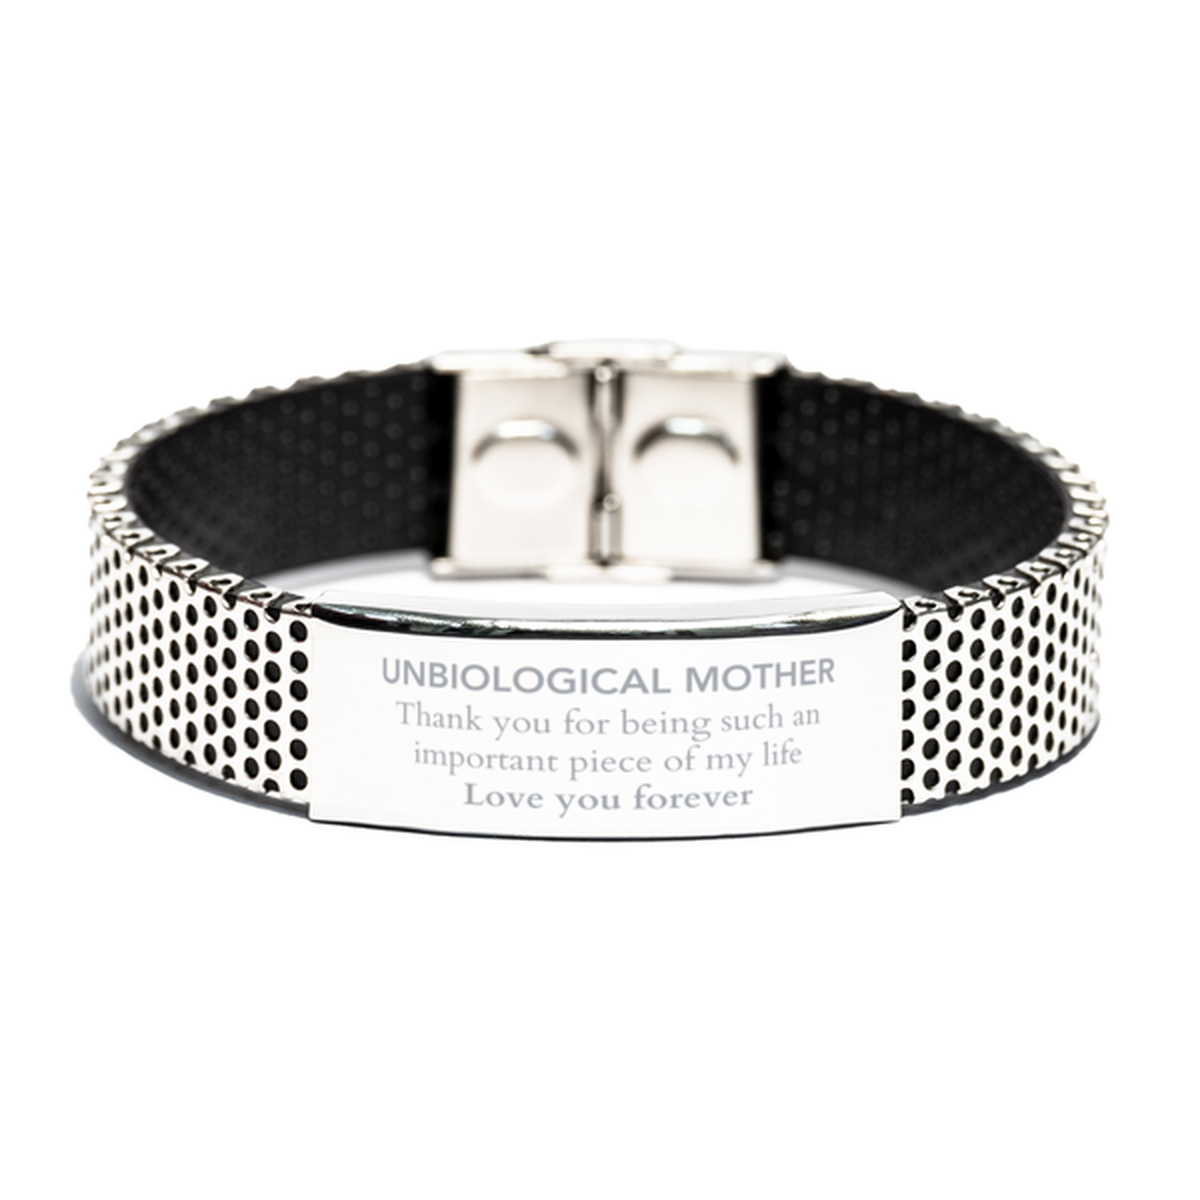 Appropriate Unbiological Mother Stainless Steel Bracelet Epic Birthday Gifts for Unbiological Mother Thank you for being such an important piece of my life Unbiological Mother Christmas Mothers Fathers Day